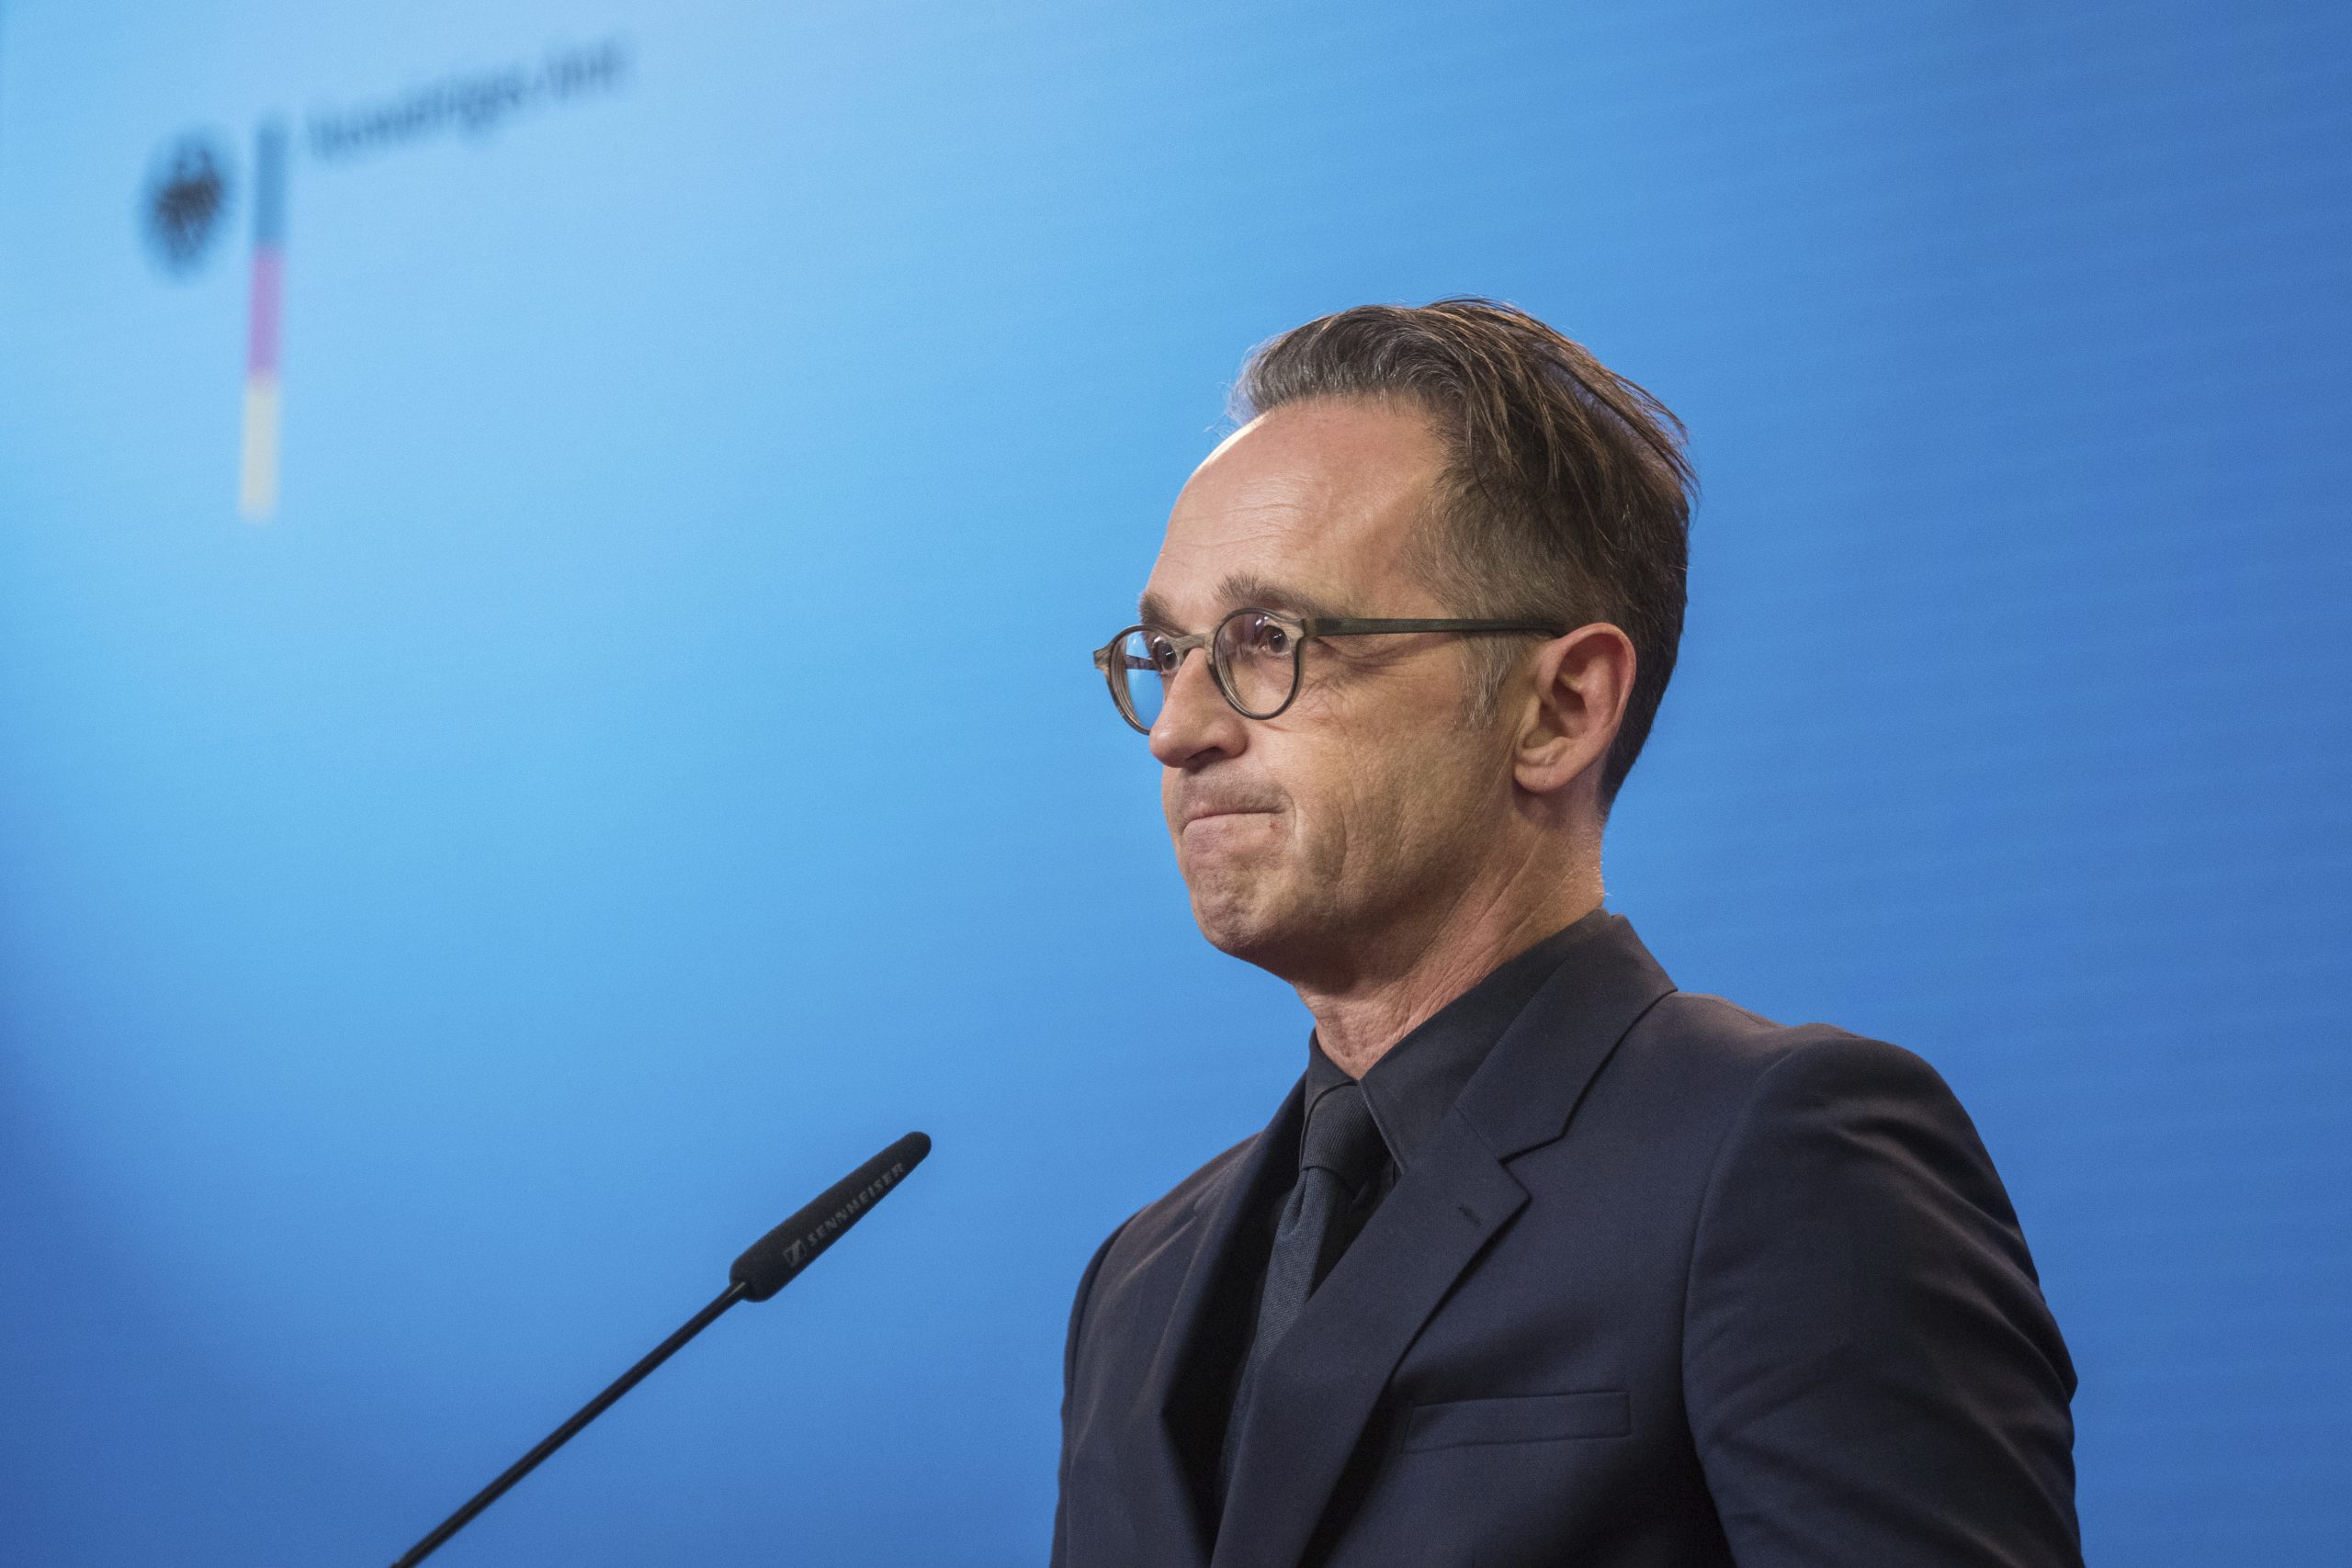 Germany says an old Soviet nerve gas was used in the Russian opposition figure Alexei Navalny